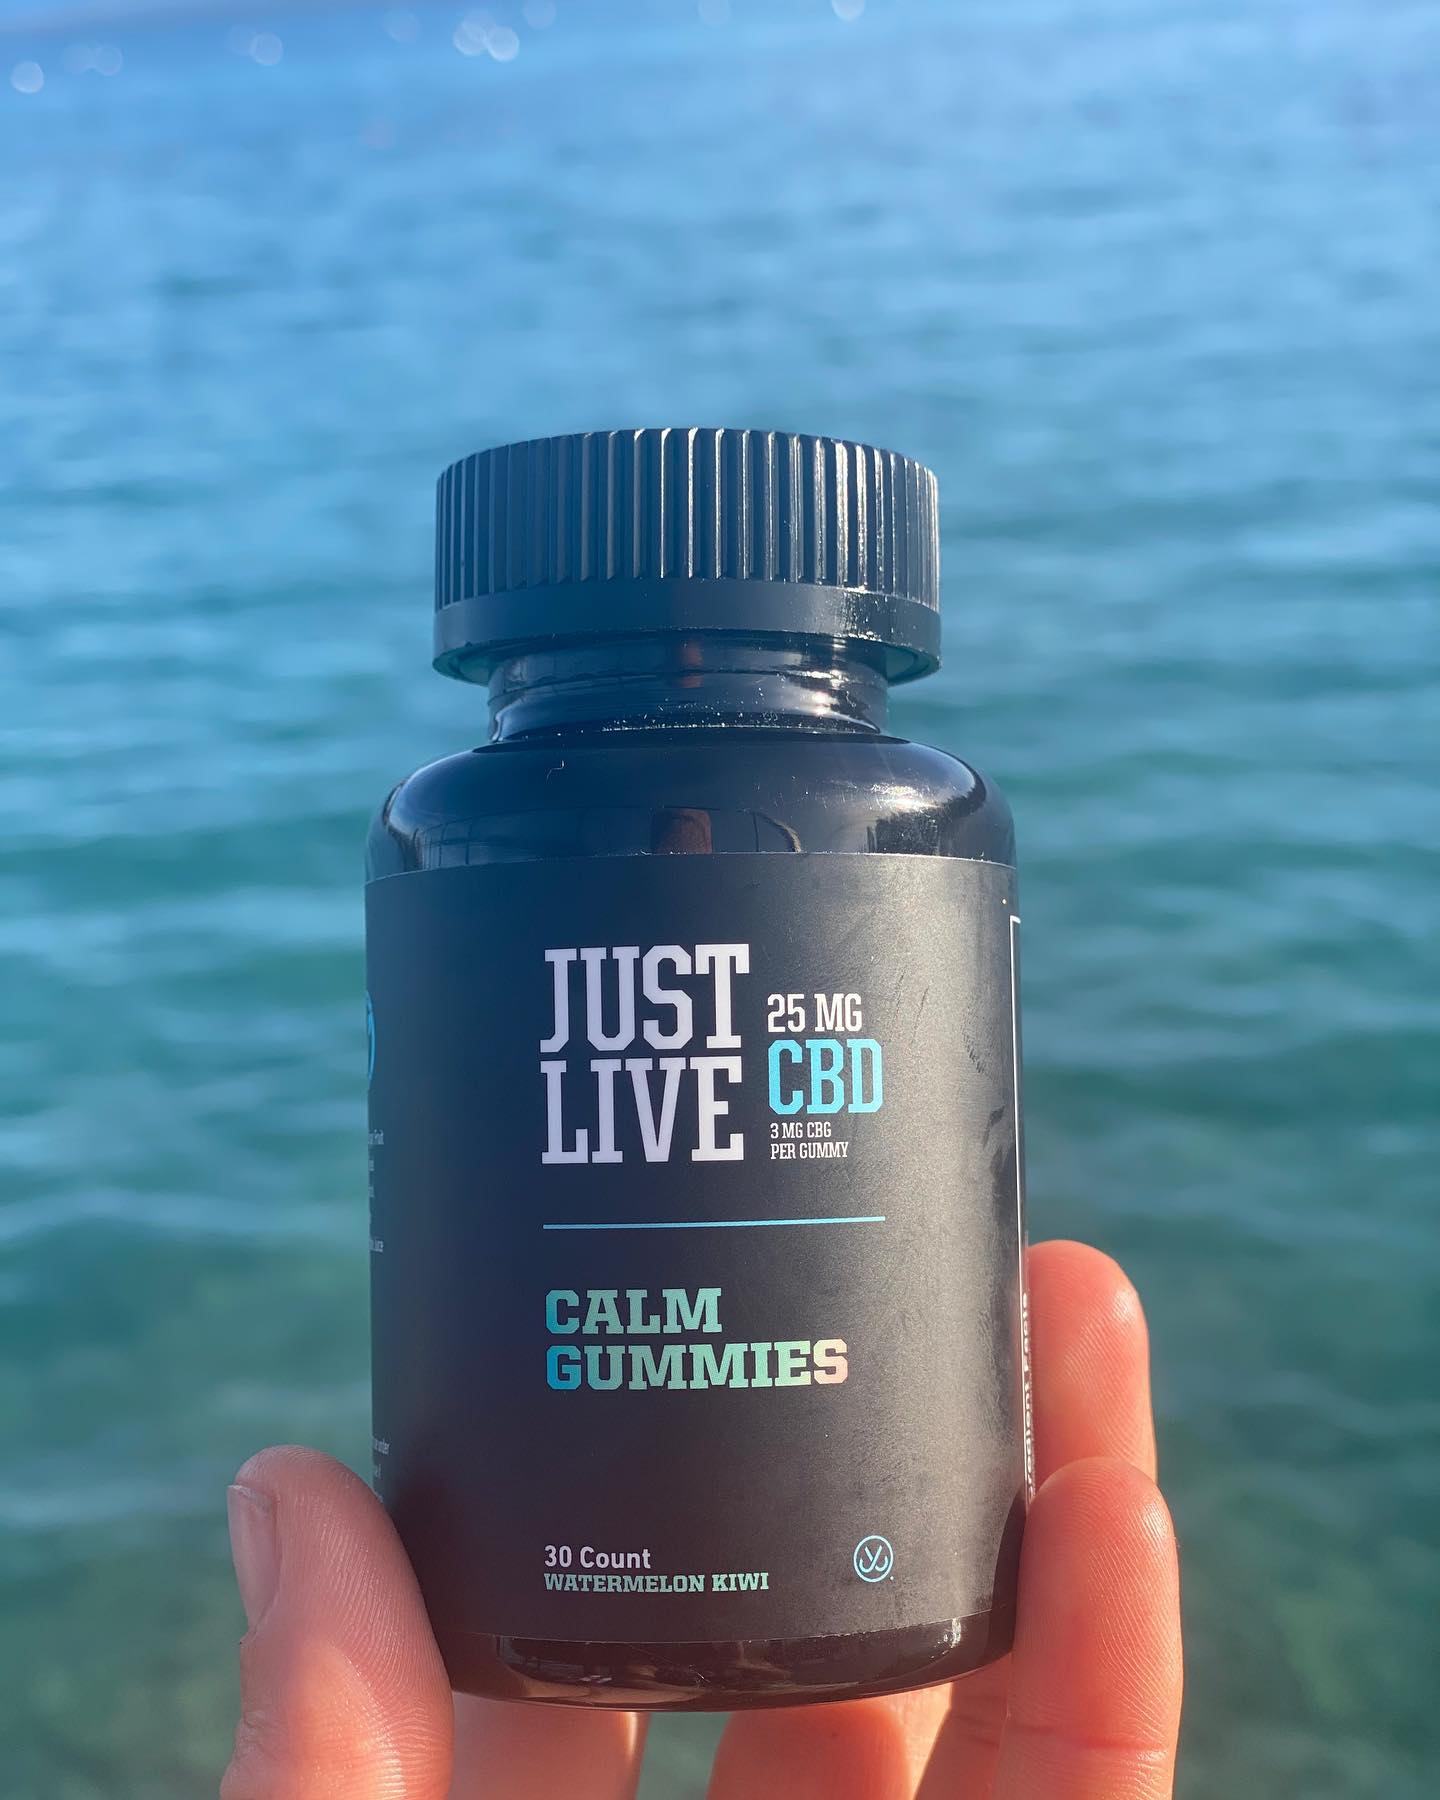 JUST LIVE CBD REVIEW